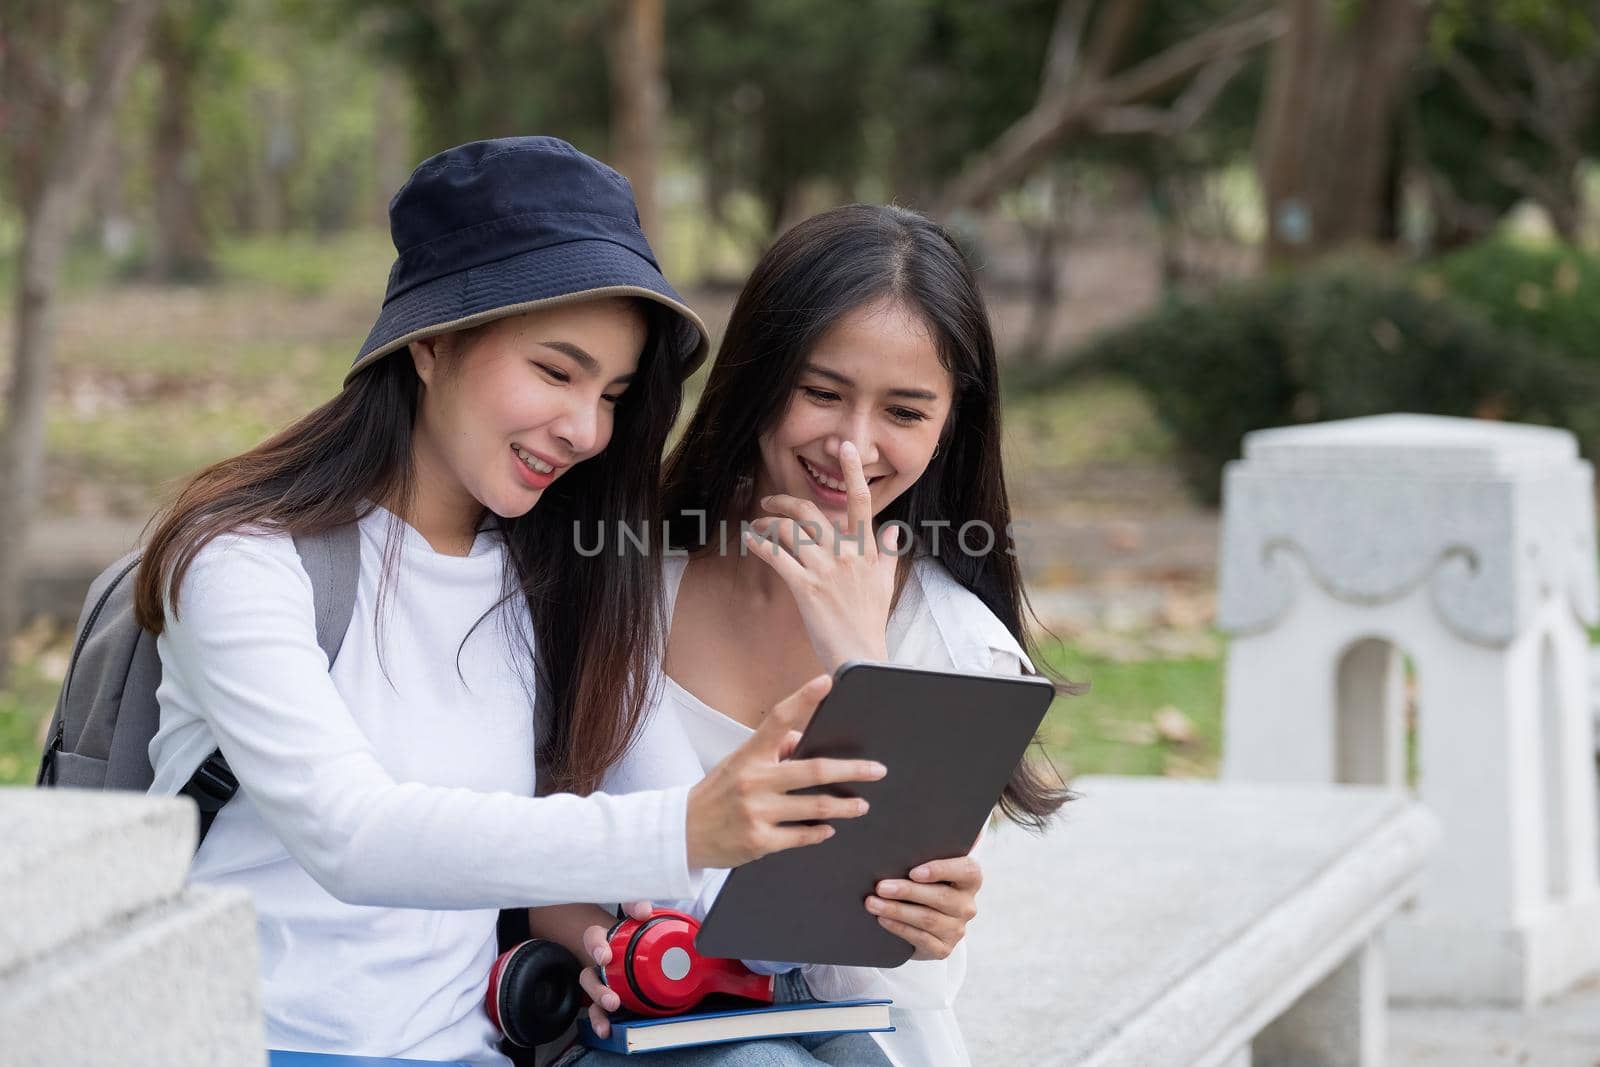 Asin female students wearing casual clothes sitting at outdoor having deep looks in books. Cute female explaining something to her friend pointing